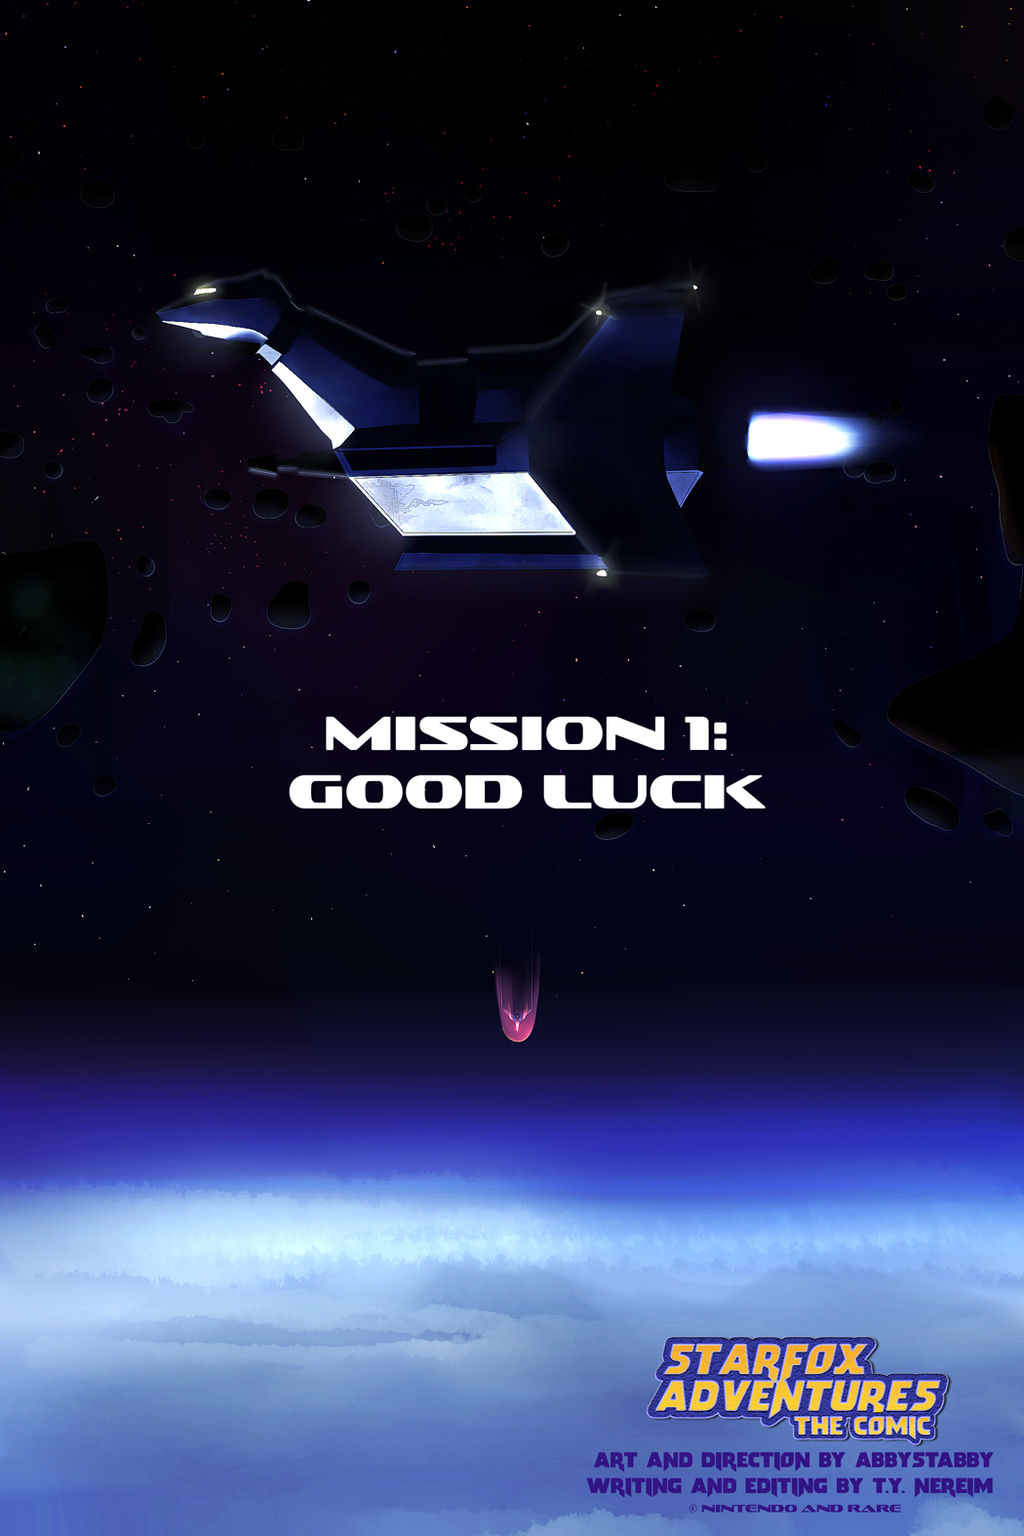 MISSION 1 : Good Luck